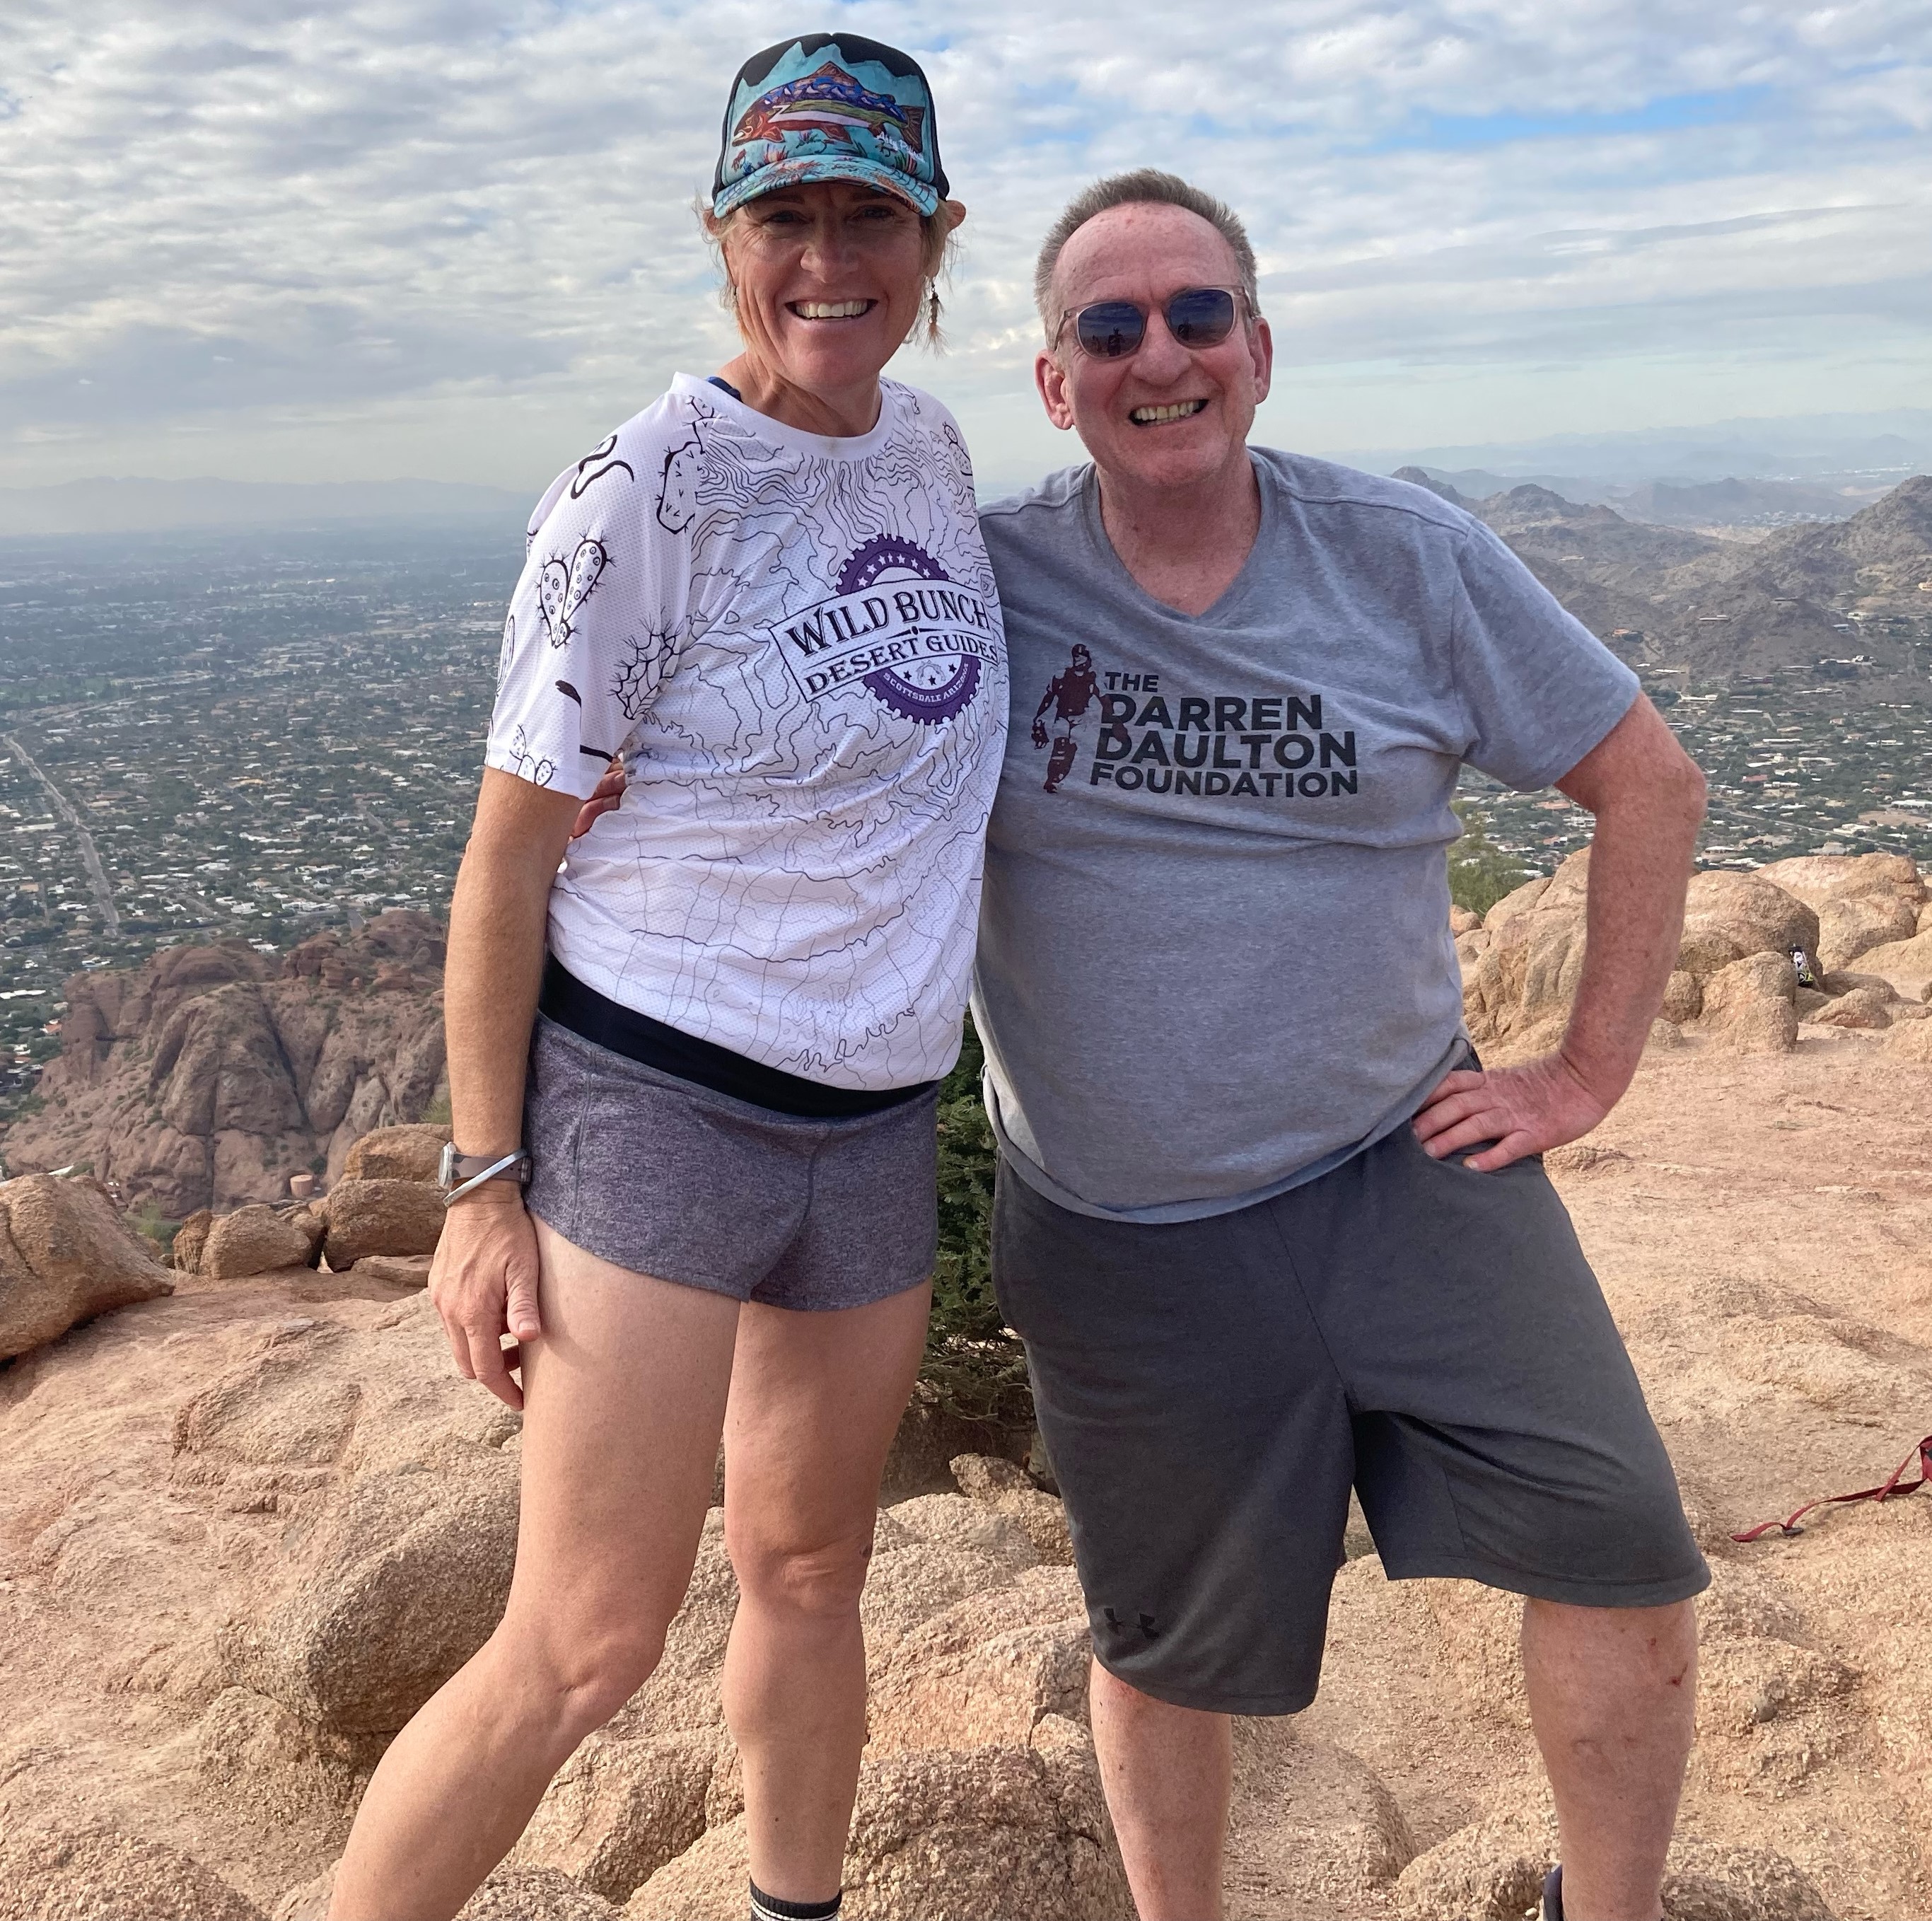 Laurel Darren (left) and John Duffin pause to pose together atop Camelback Mountain during one of the Wild Bunch Desert Guides epic Phoenix hiking tours on the iconic Arizona landmark.